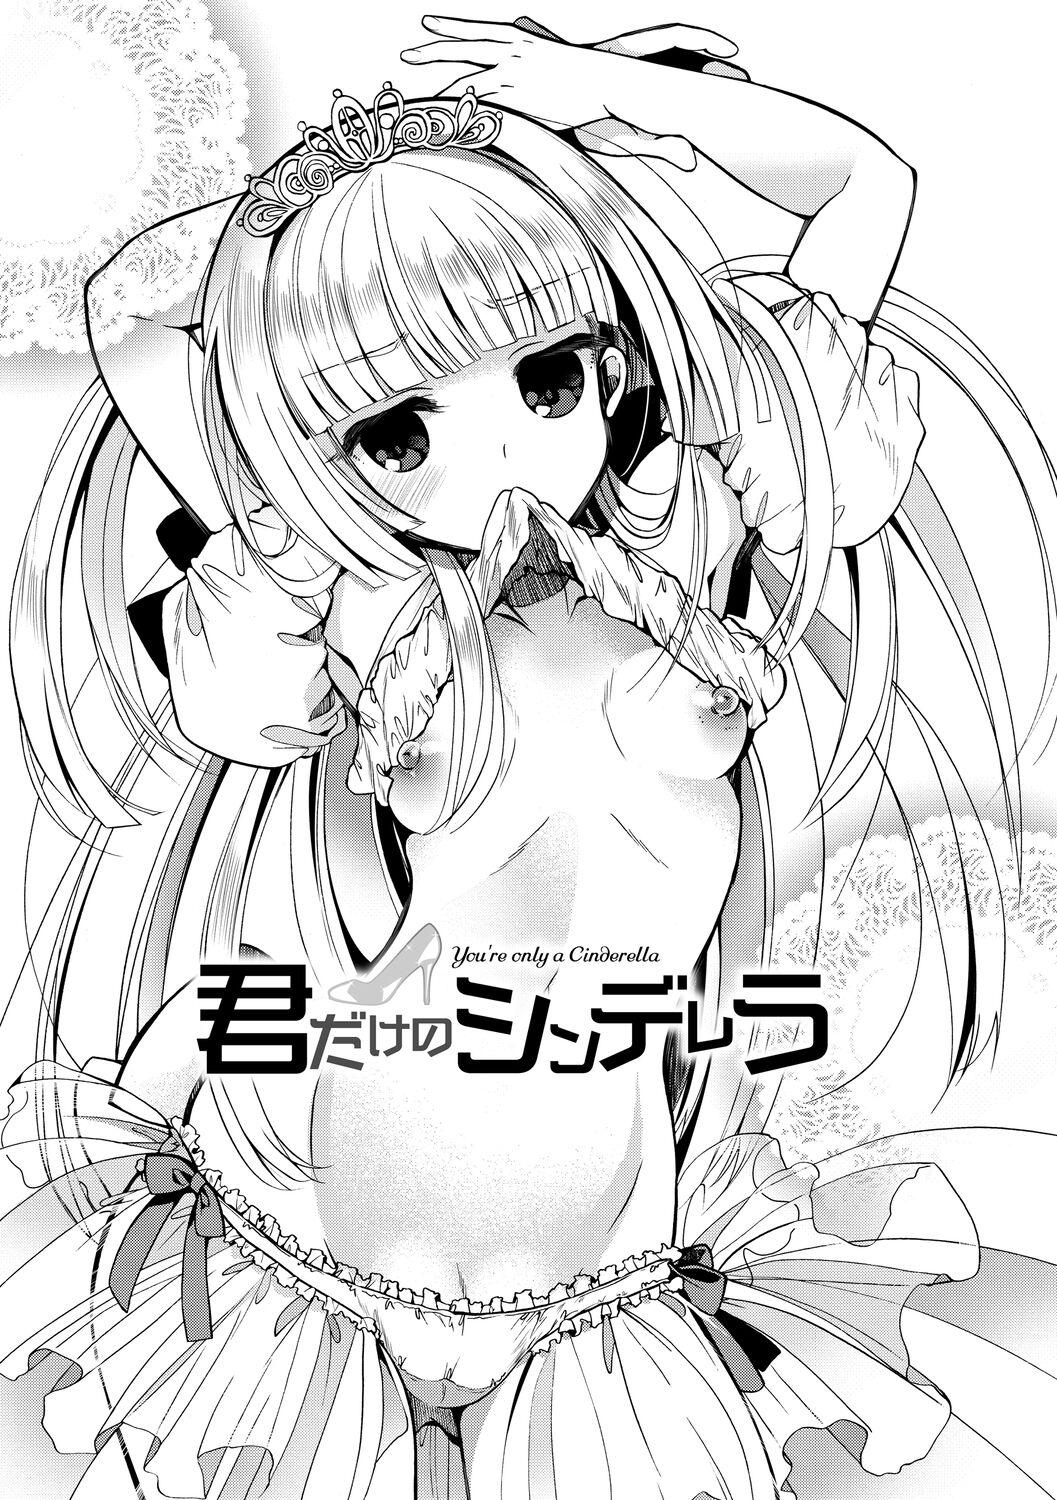 Hatsukoi Melty - Melty First Love 134